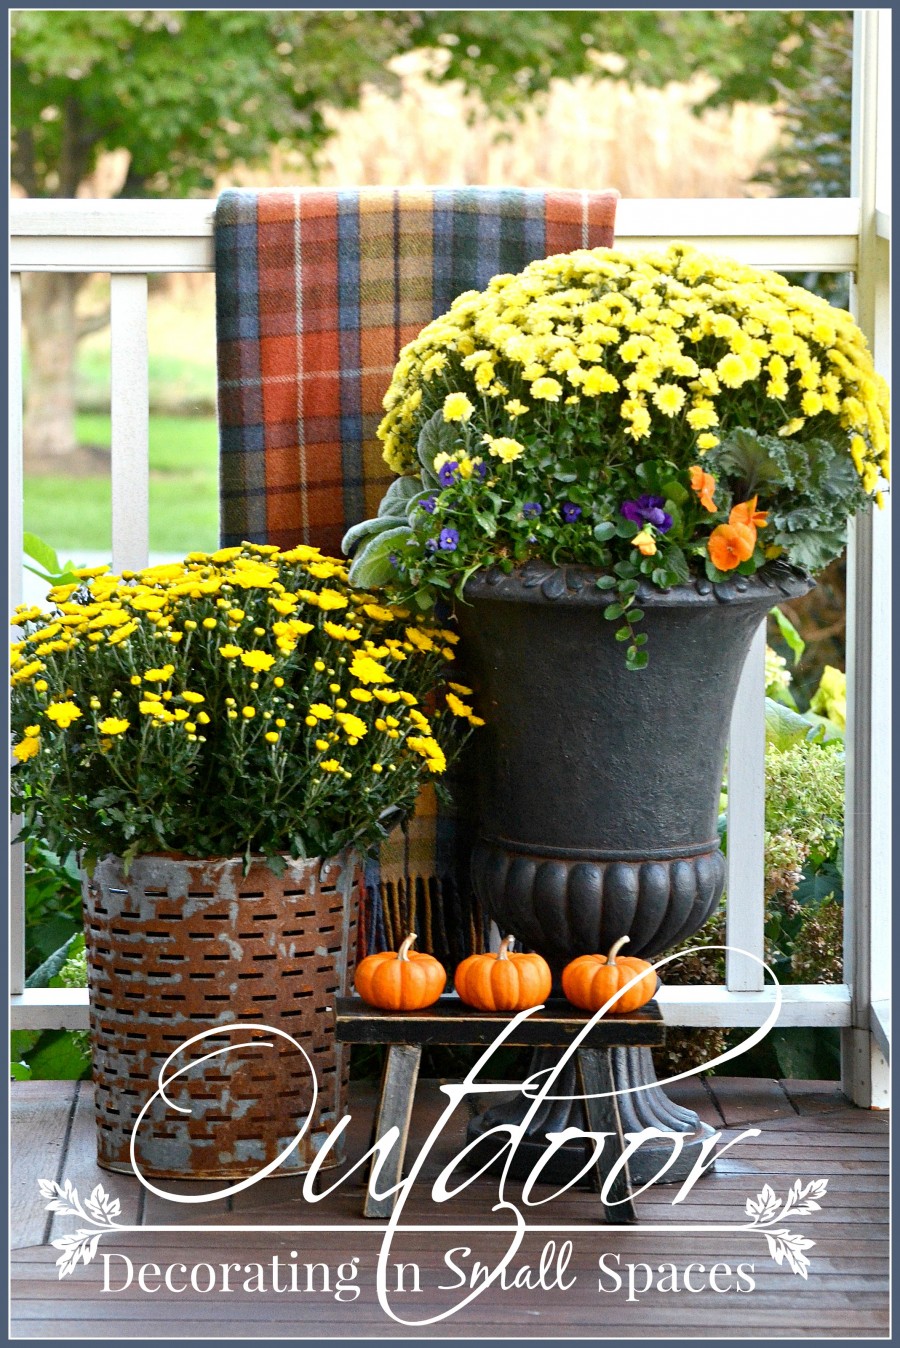 OUTDOOR DECORATING IN SMALL SPACES-Easy to do ideas for decorating small outdoors spaces.